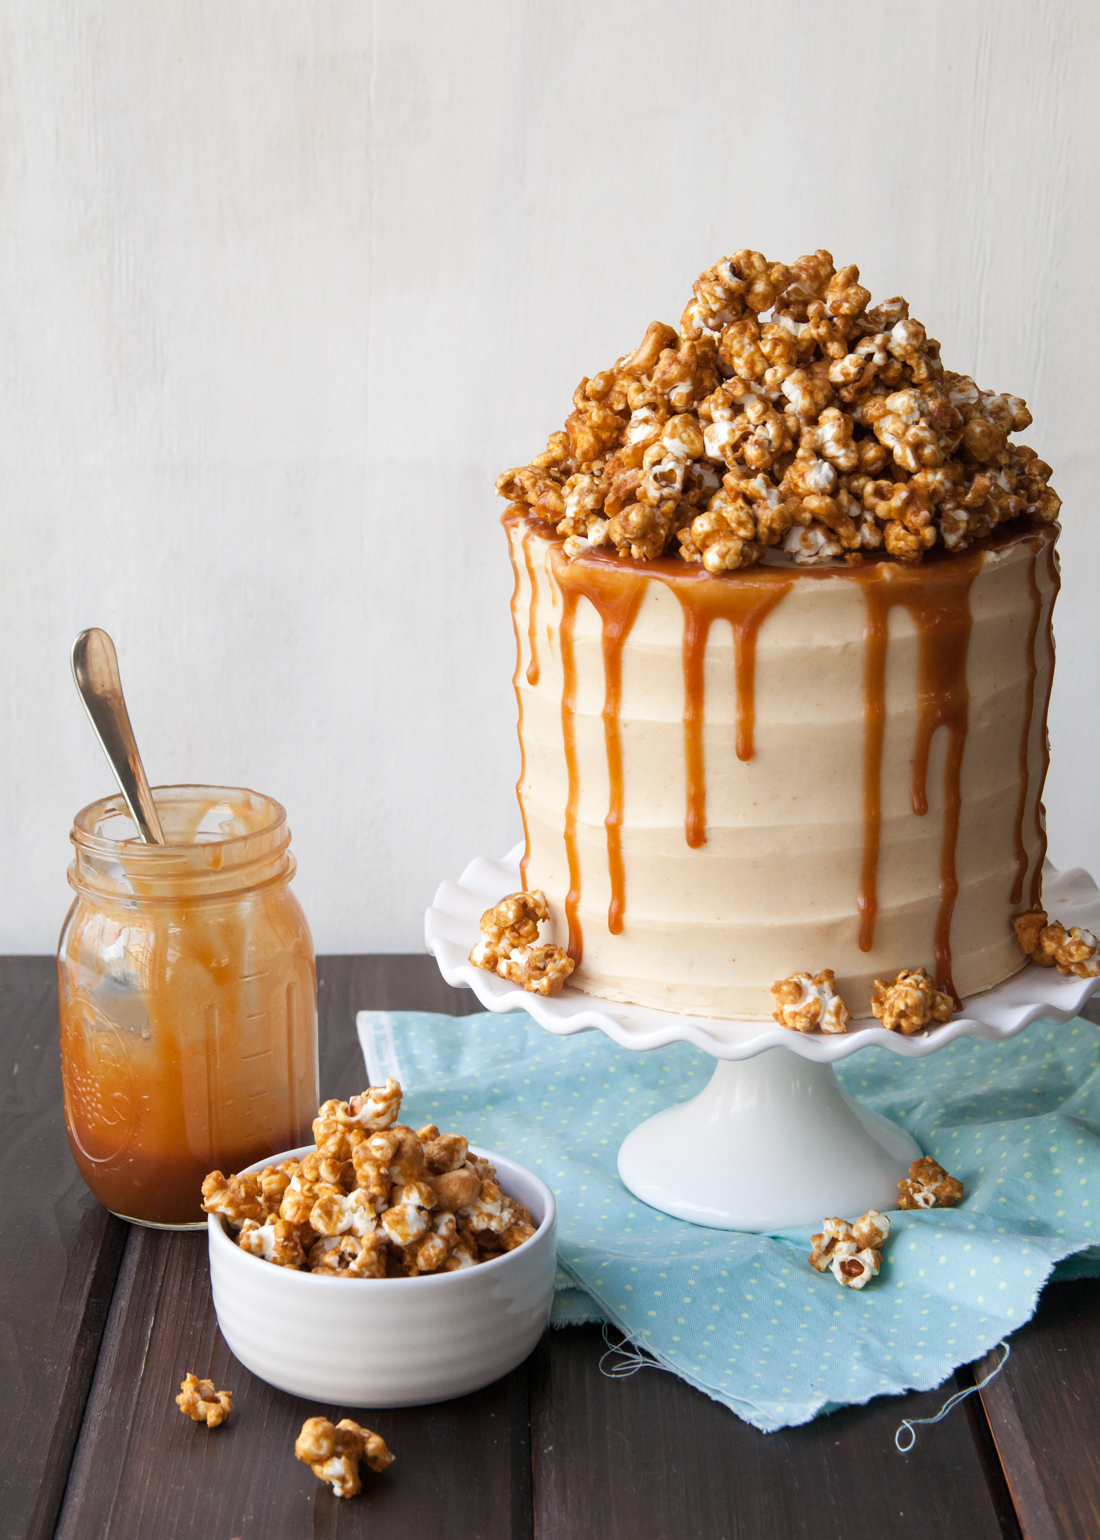 Caramel Popcorn Cake Recipe with brown butter cake and peanut butter frosting.